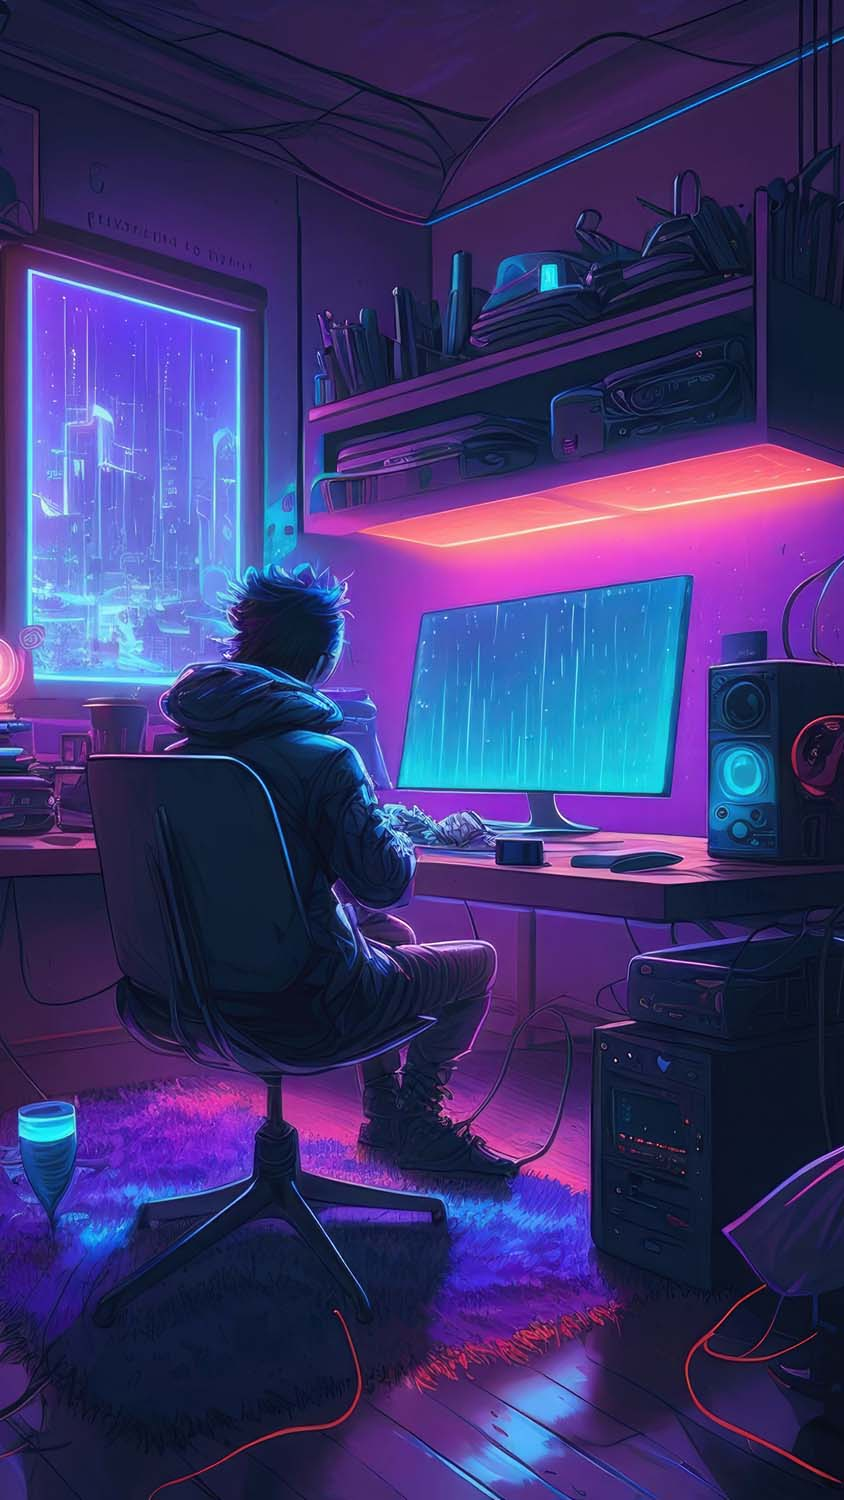 The Cyber Room